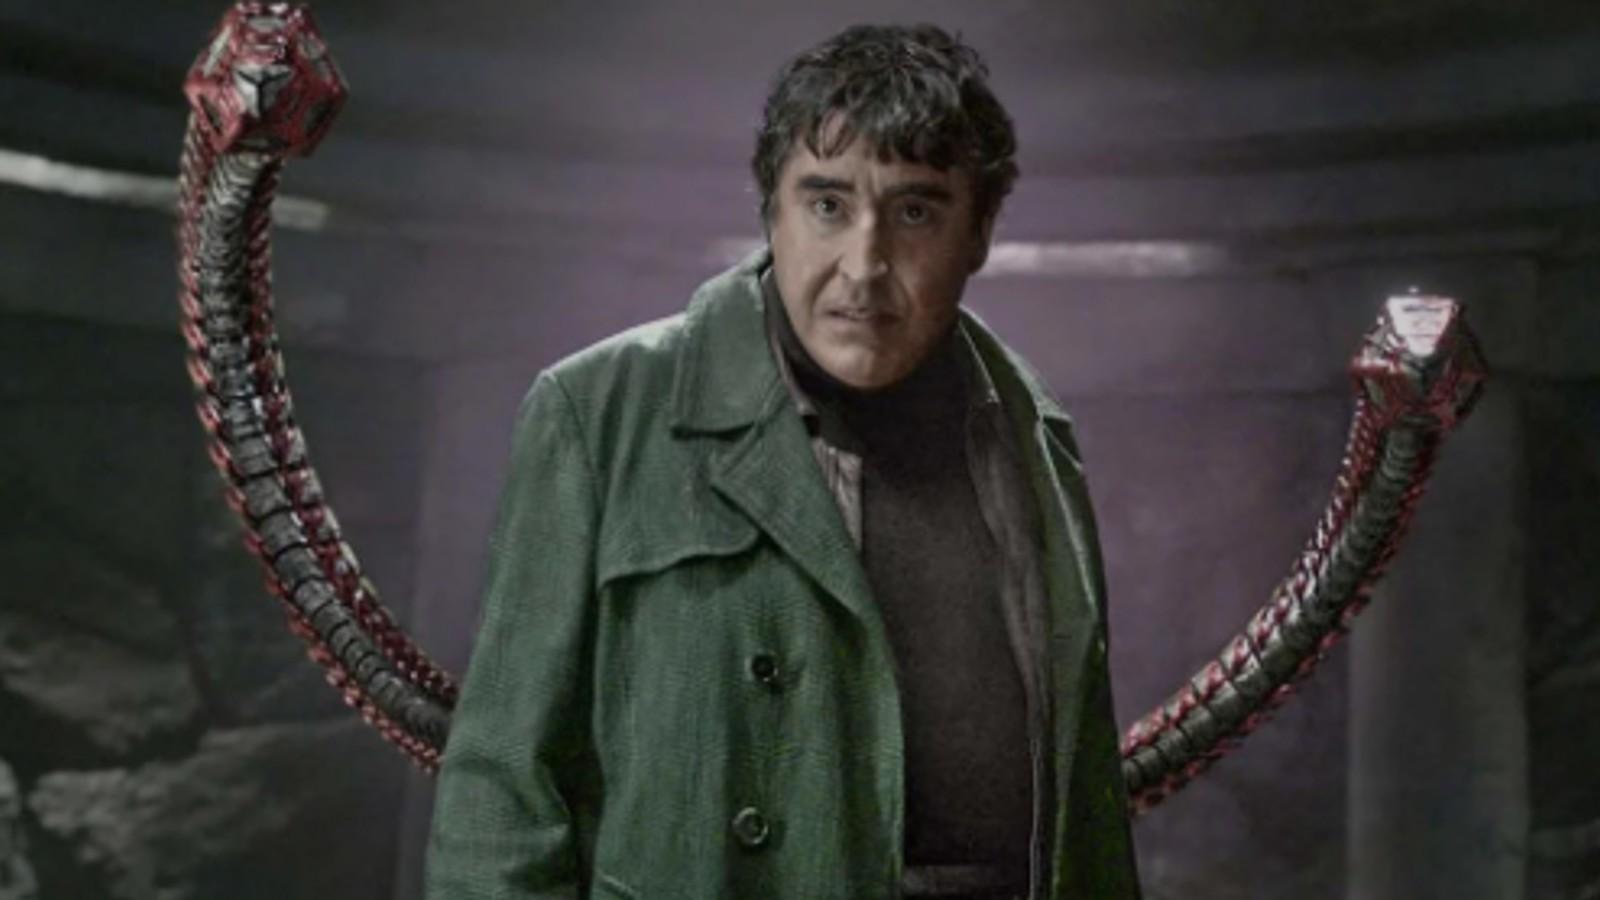 Alfred Molina in Spider-Man: No Way Home